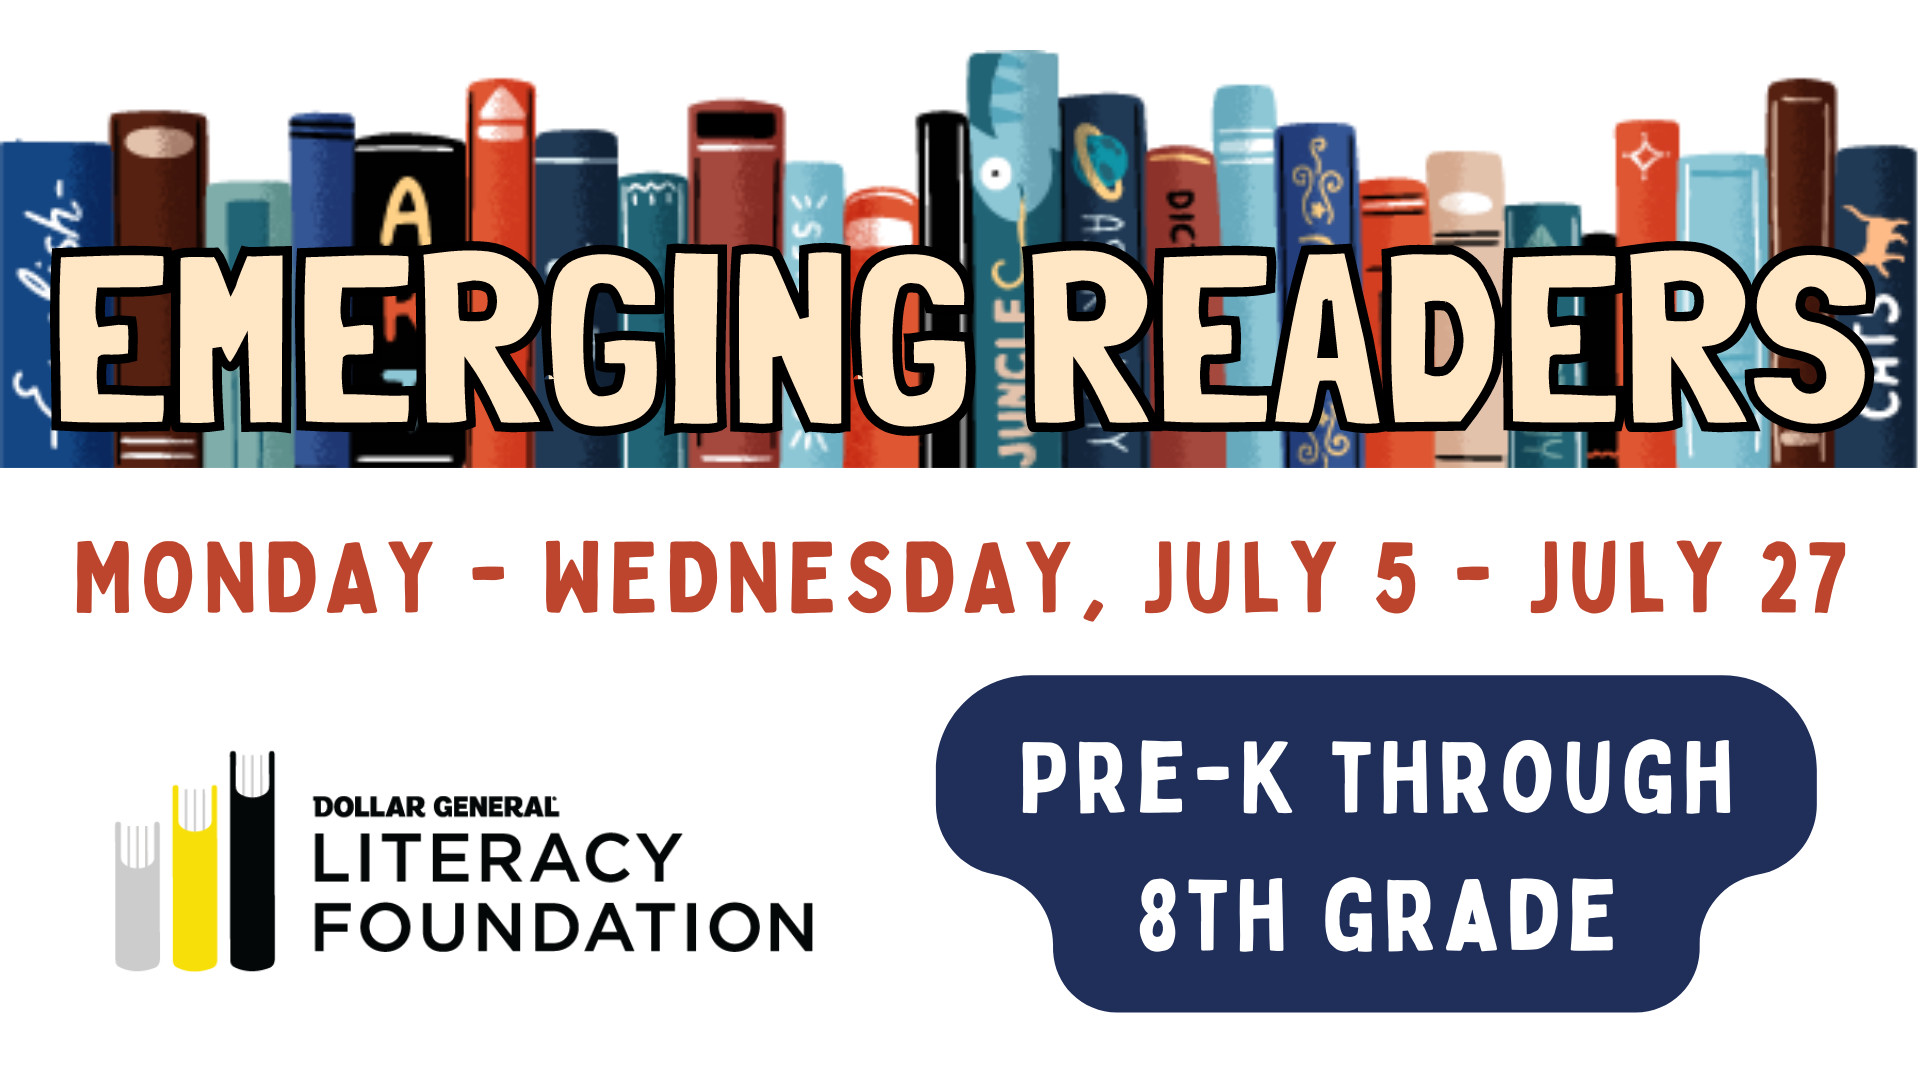 Emerging Readers. Monday-Wednesday. July 5 - July 24. Pre-K through 8th grade.